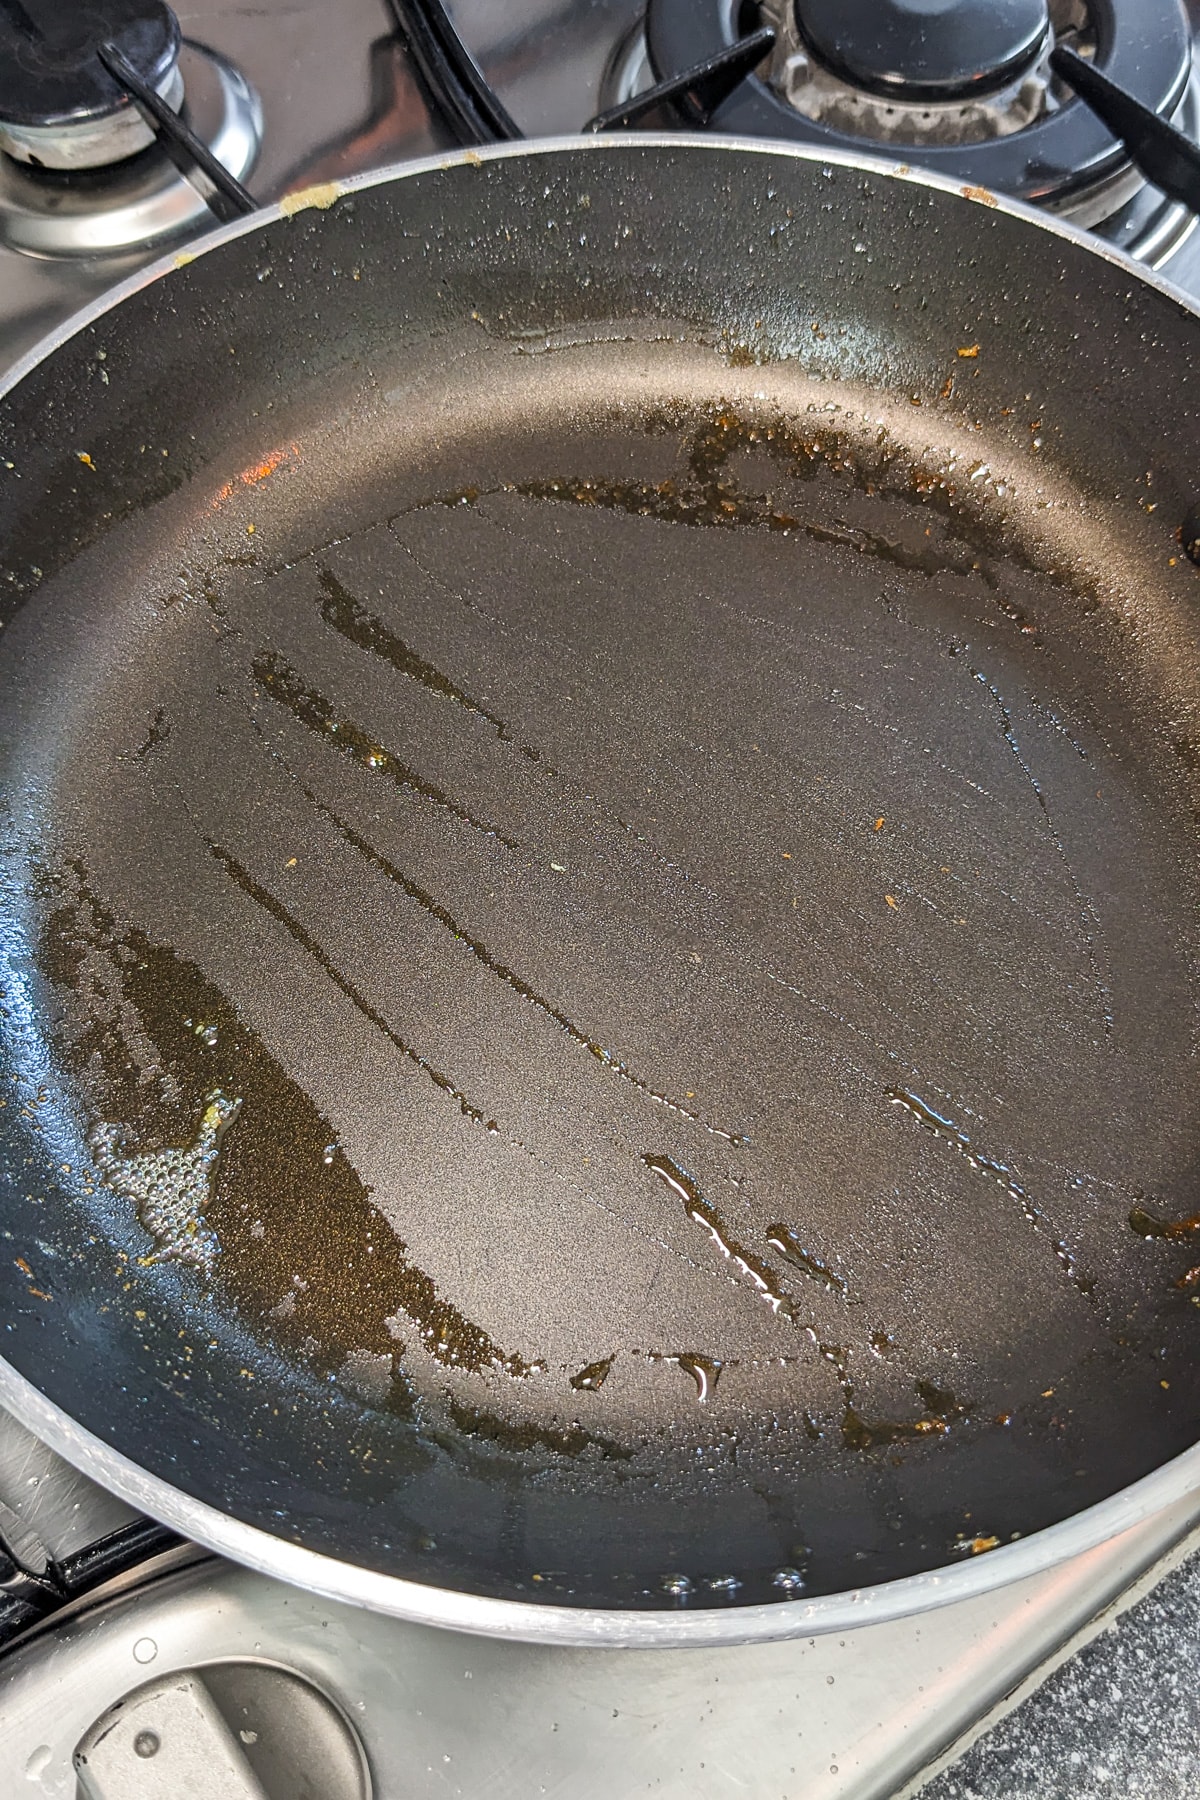 Cleaned frying pan after making meuniere sauce.